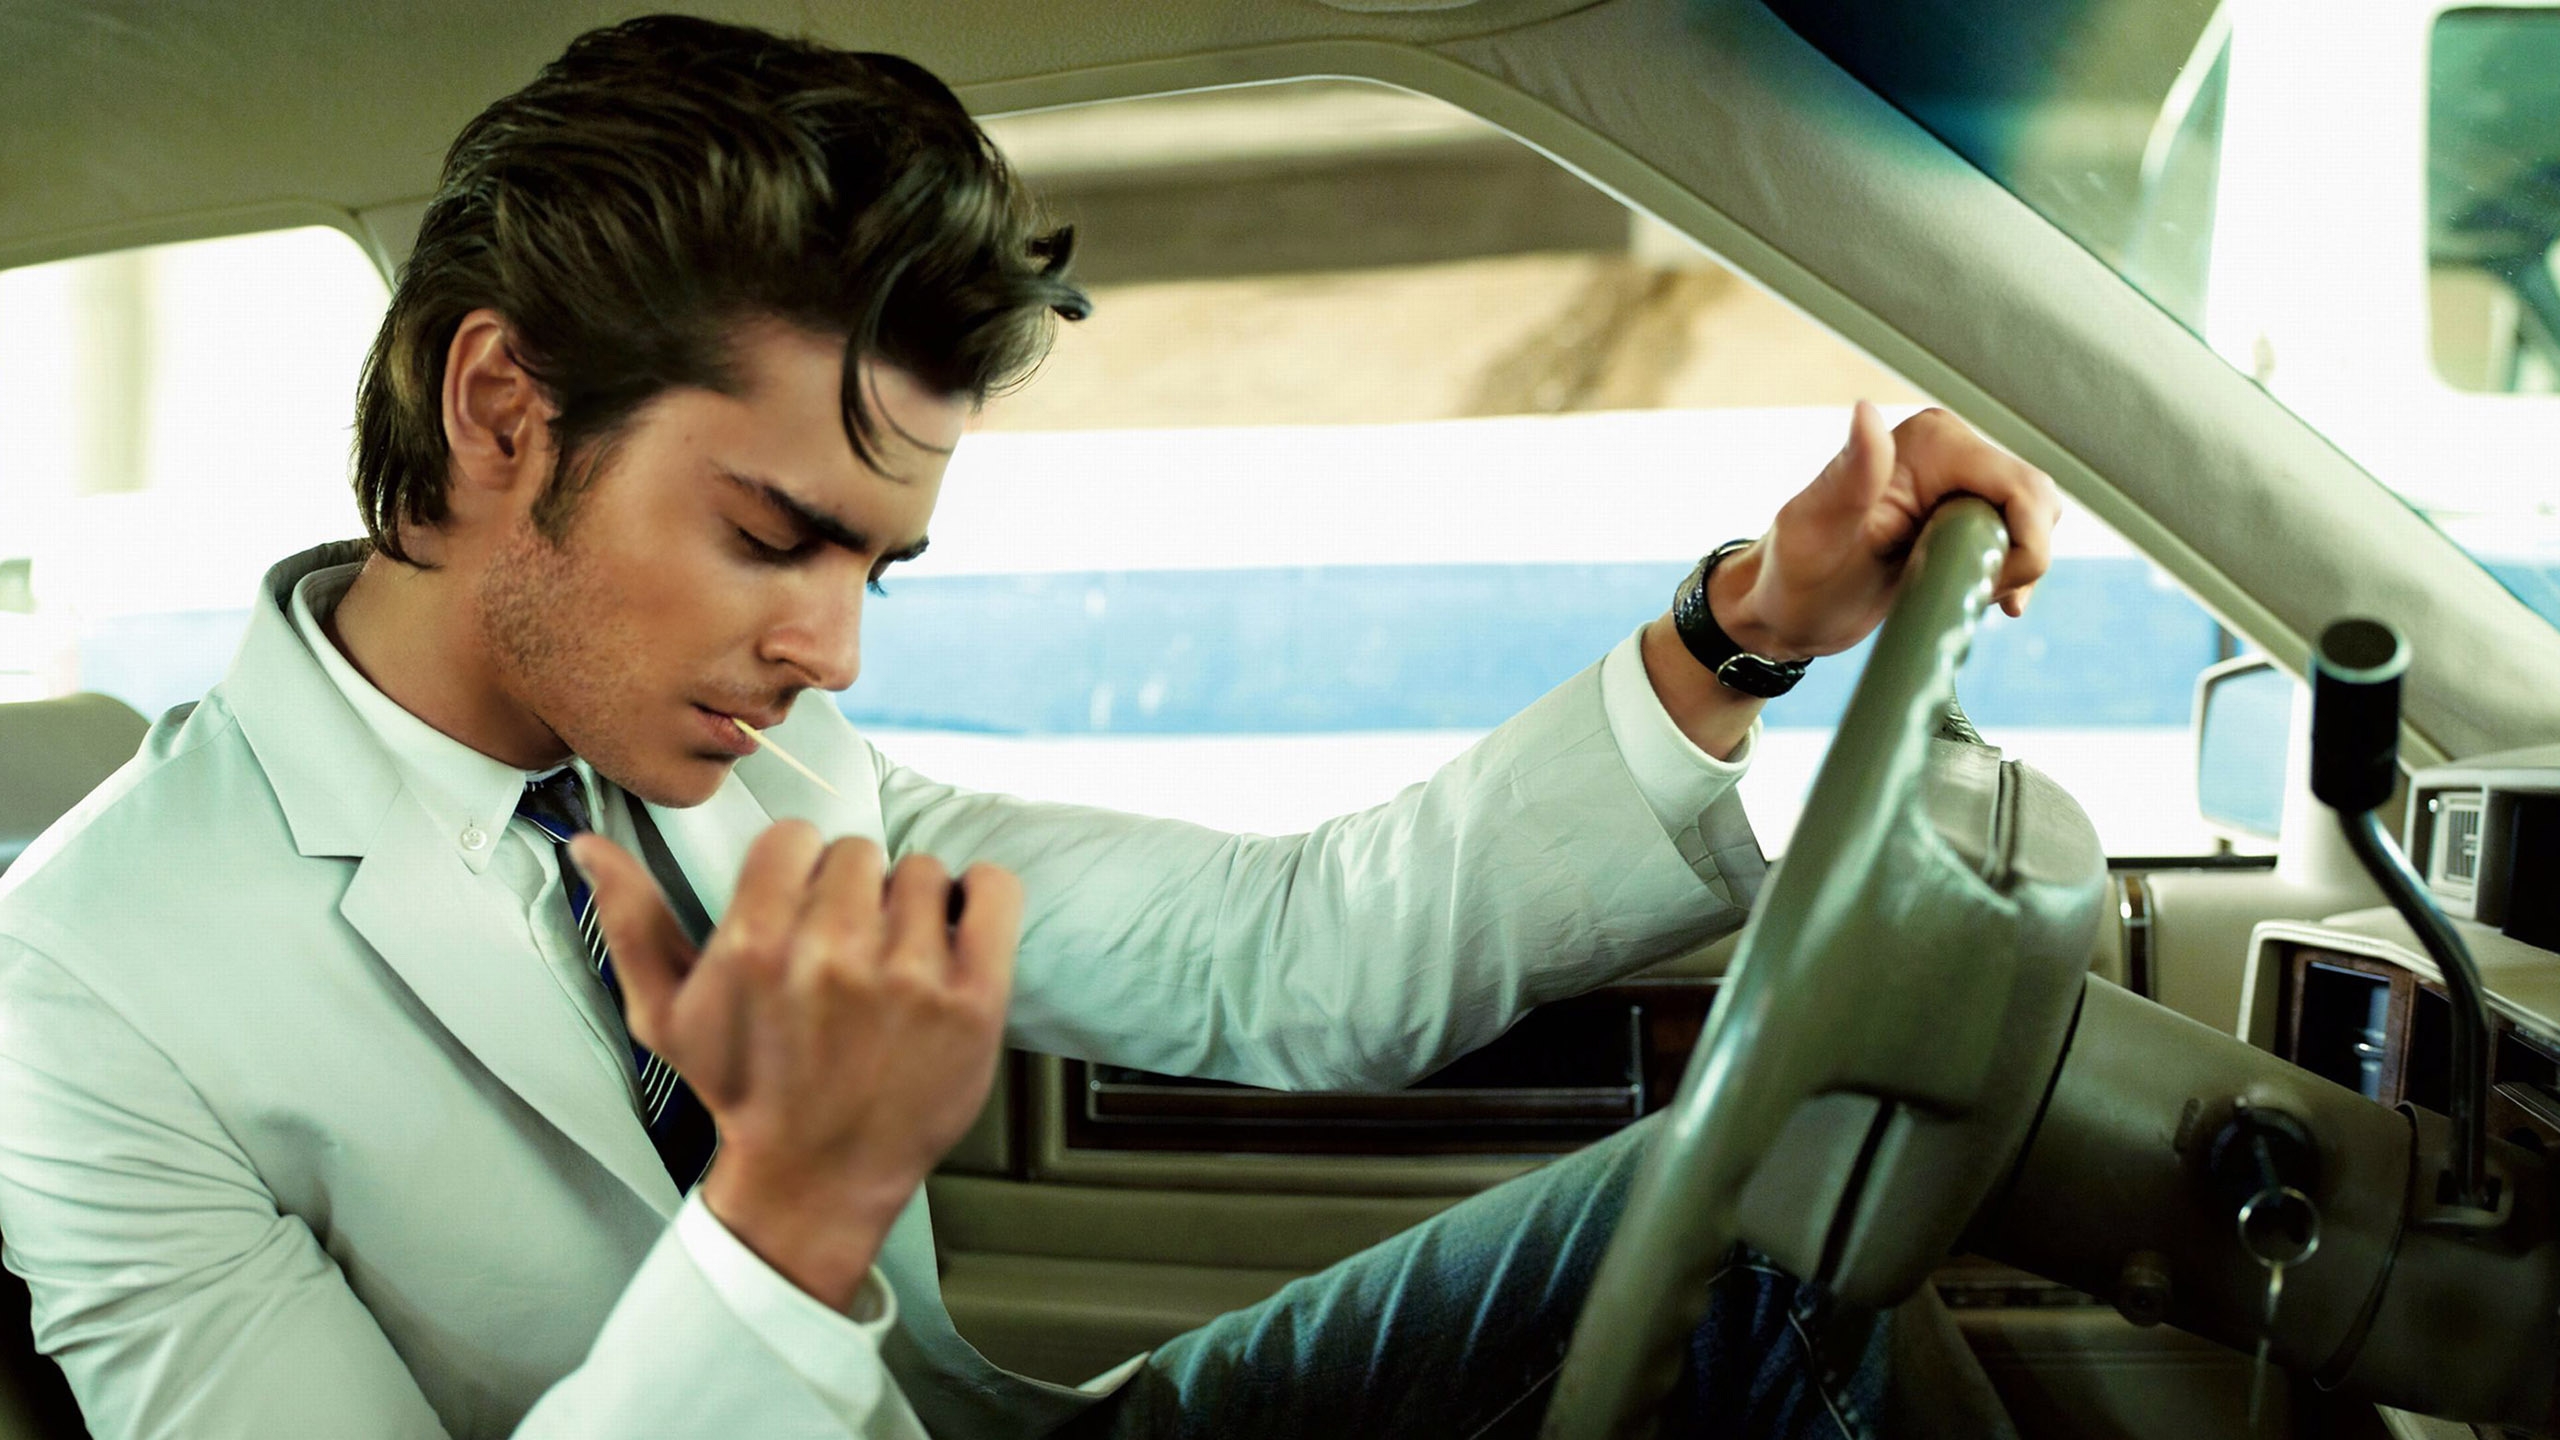 Zac Efron Rock and Roll Style for 2560x1440 HDTV resolution